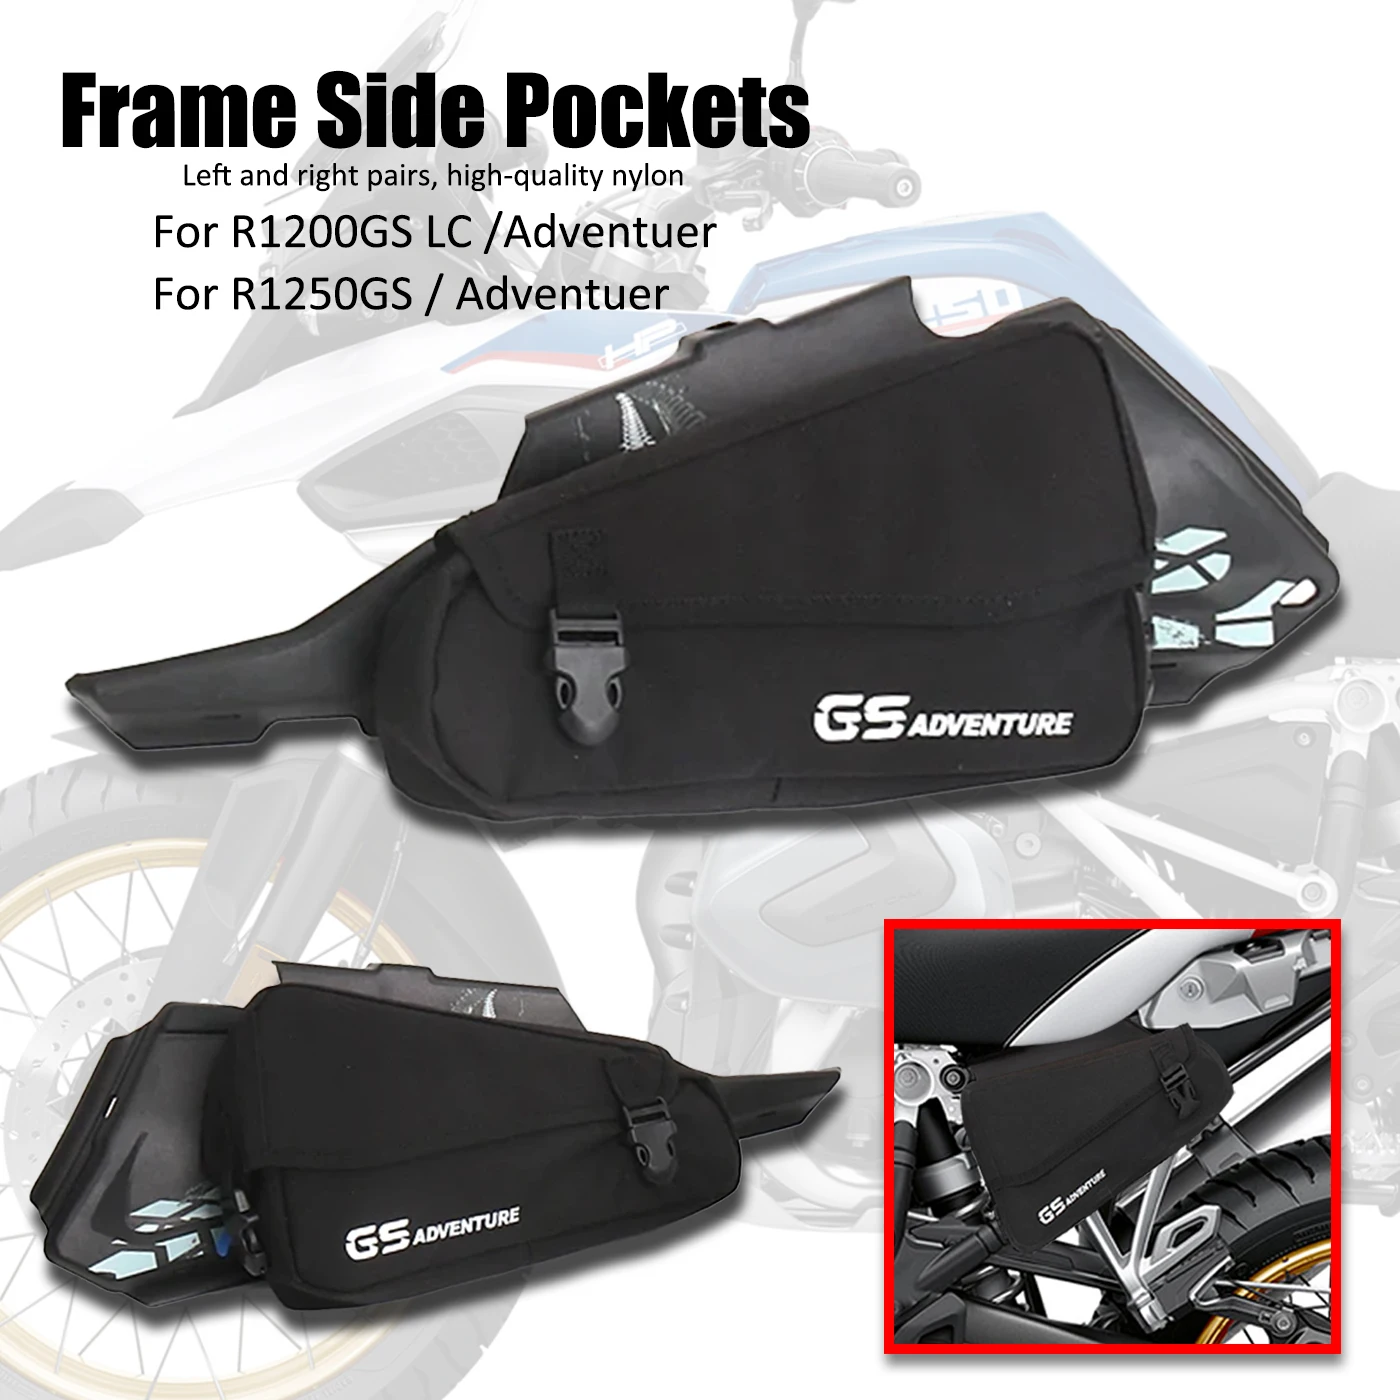 

F750GS F850GS R1250GS R 1250 1200 GS R1200GS LC ADV FIT BMW Adventure Motorcycle Frame Side Pockets Repair Tool Placement Bags